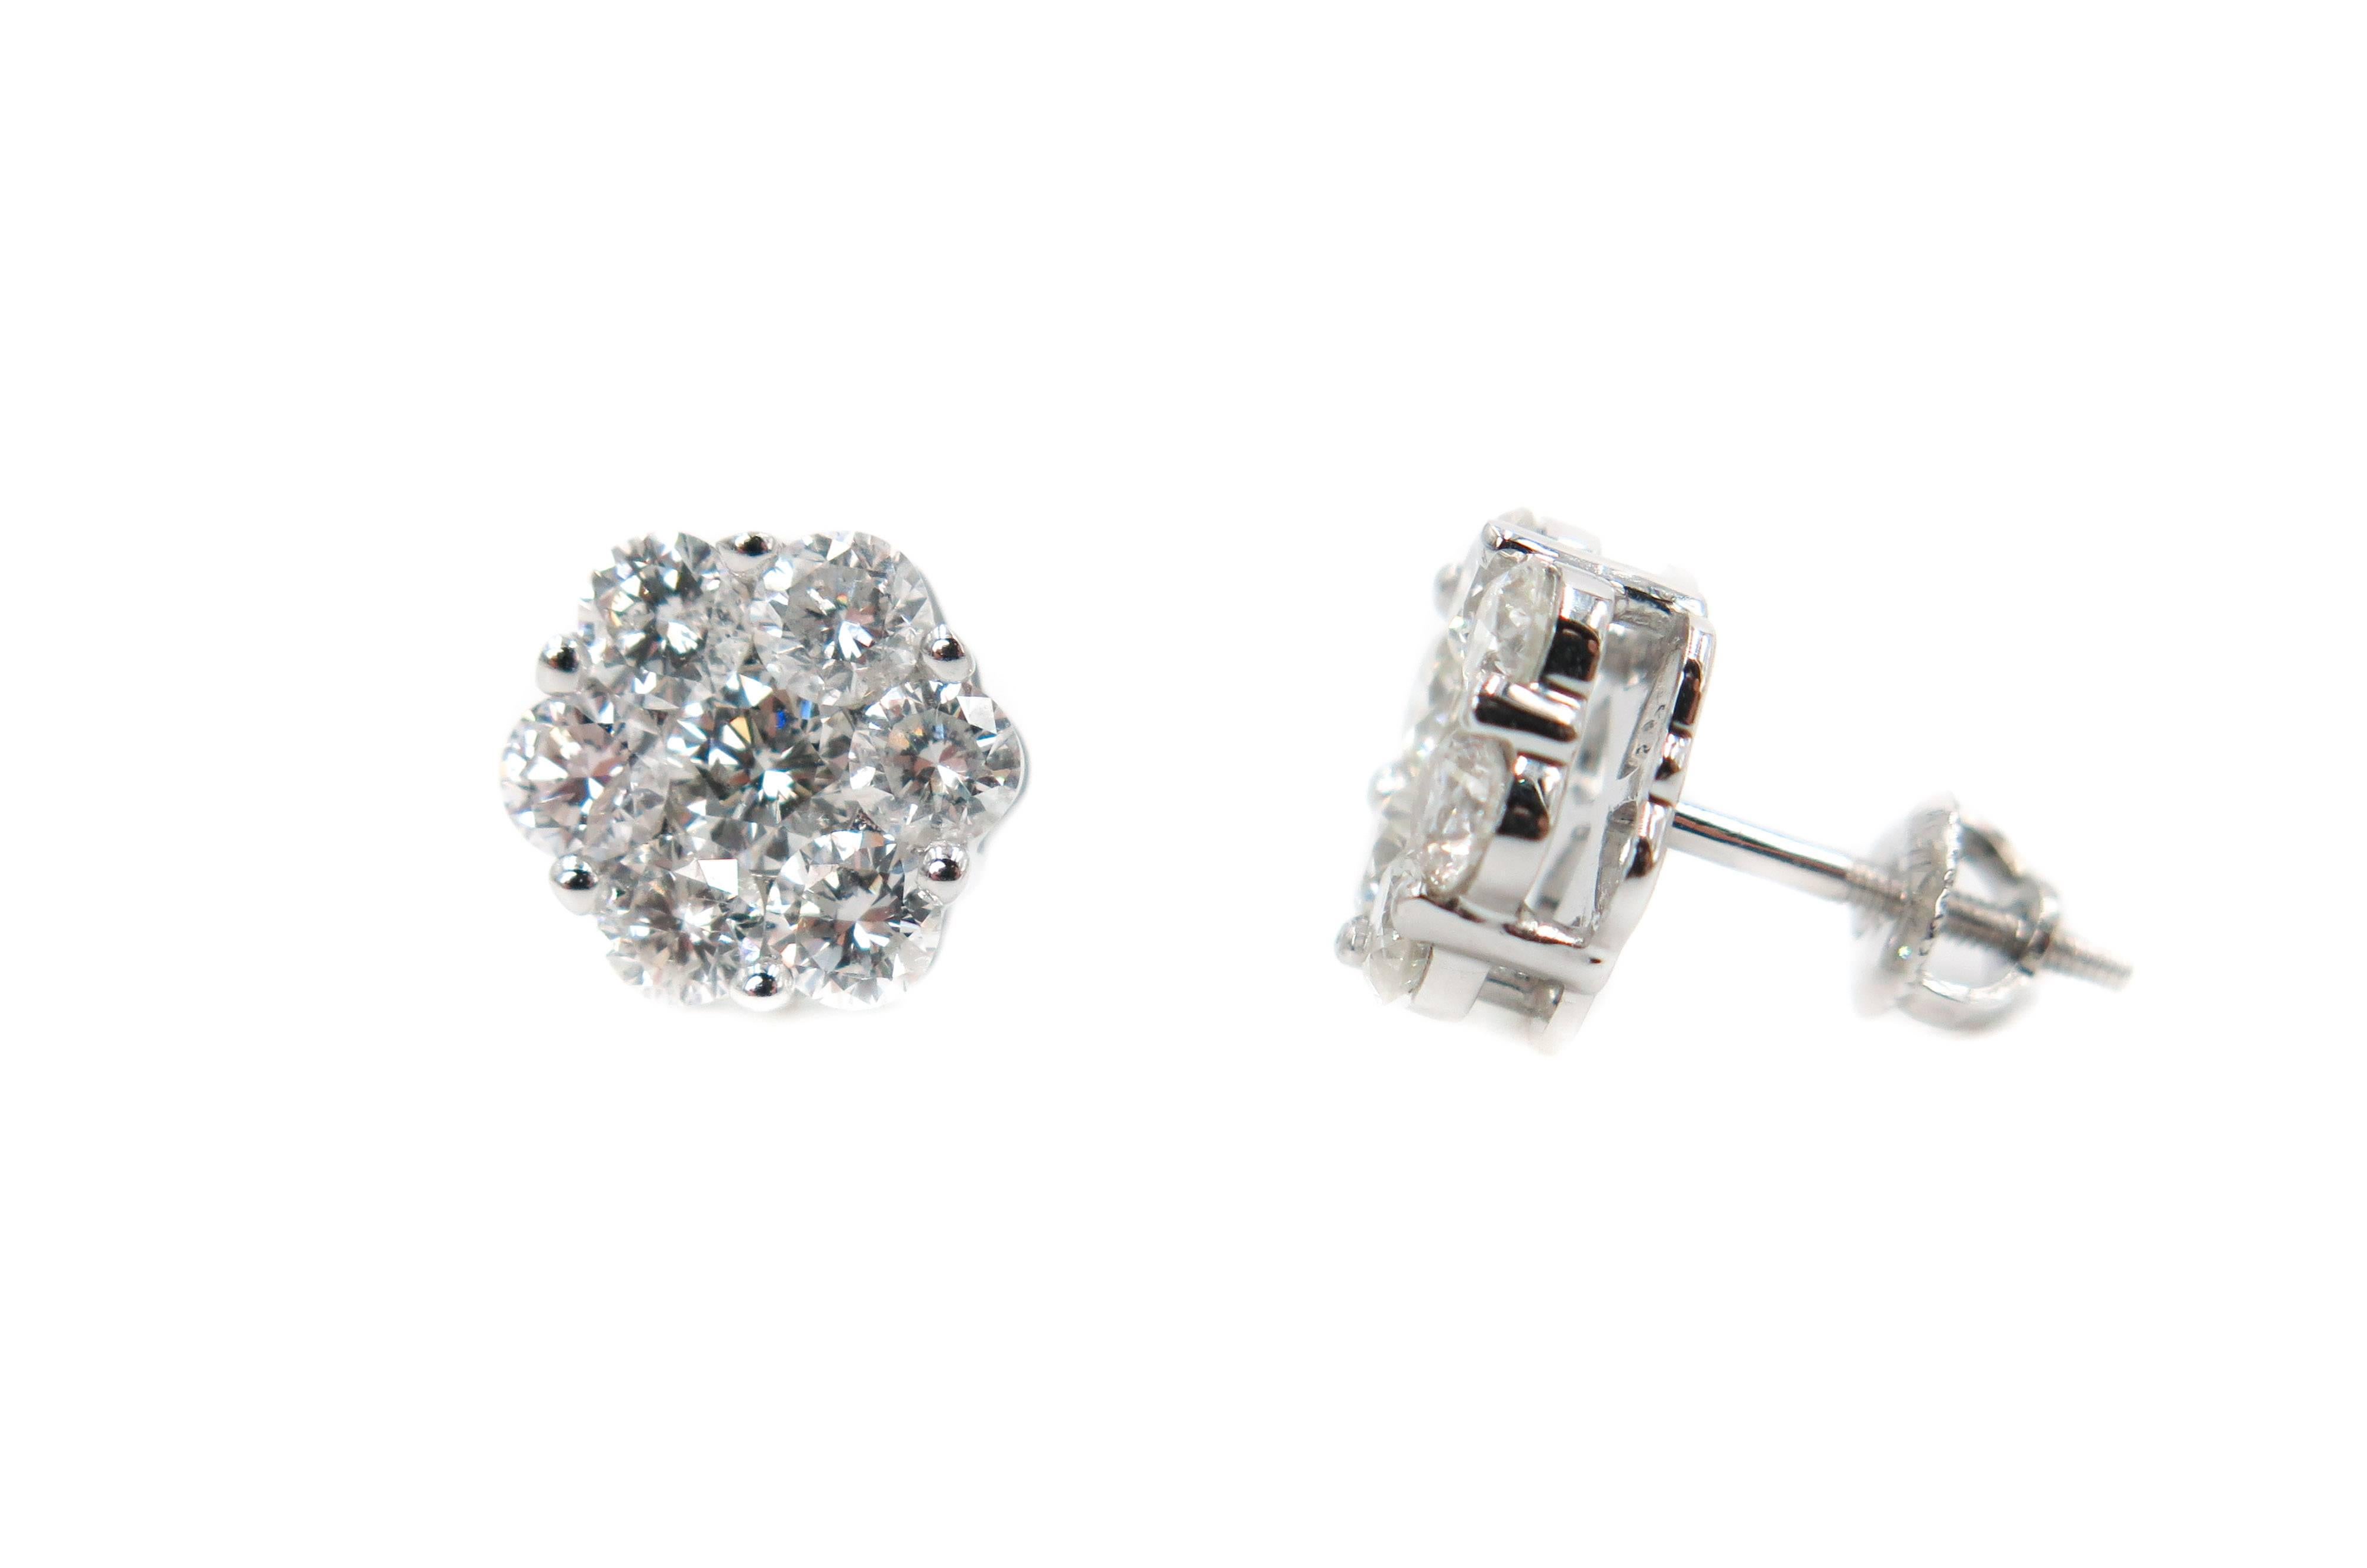 Sweet and special... this beautiful pair of earrings is just what you need :)
Handpicked and perfectly matched round cut diamonds, creatively set in white gold, blooms into this gorgeous pair of diamond earrings. The attention to detail and the